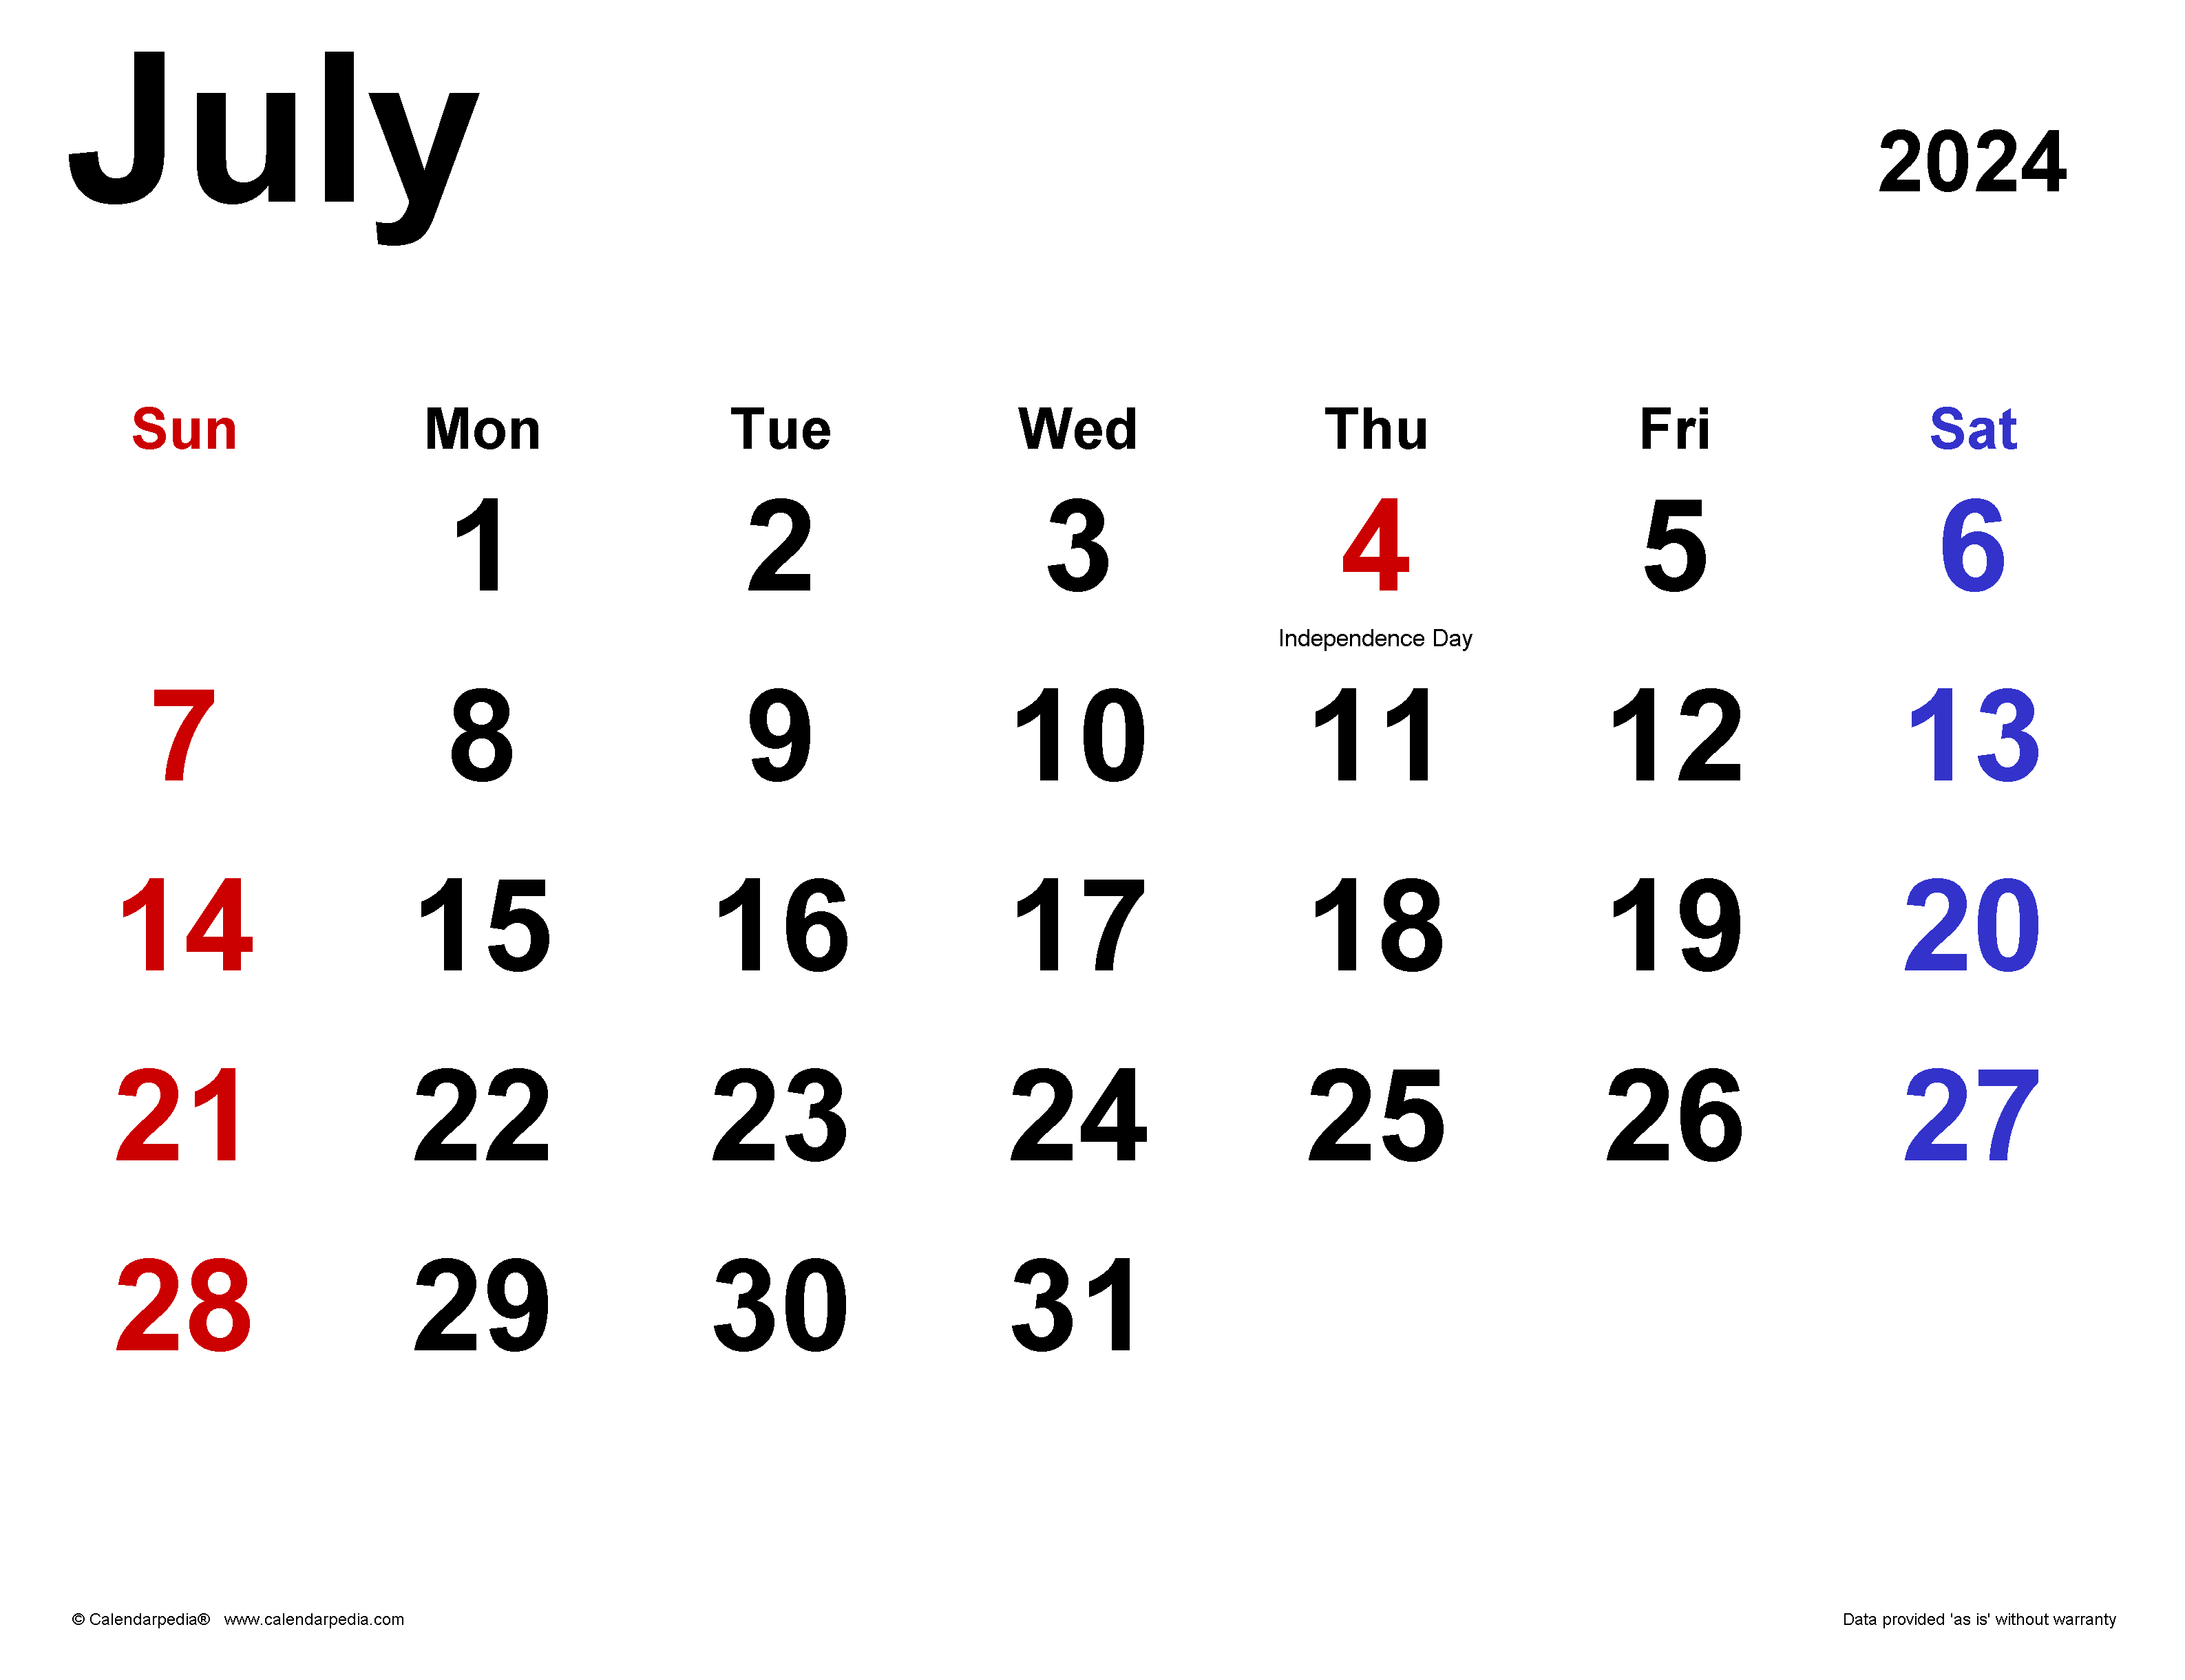 July 2024 Calendar | Templates For Word, Excel And Pdf intended for 6 Month Wall Calendar Starting July 2024